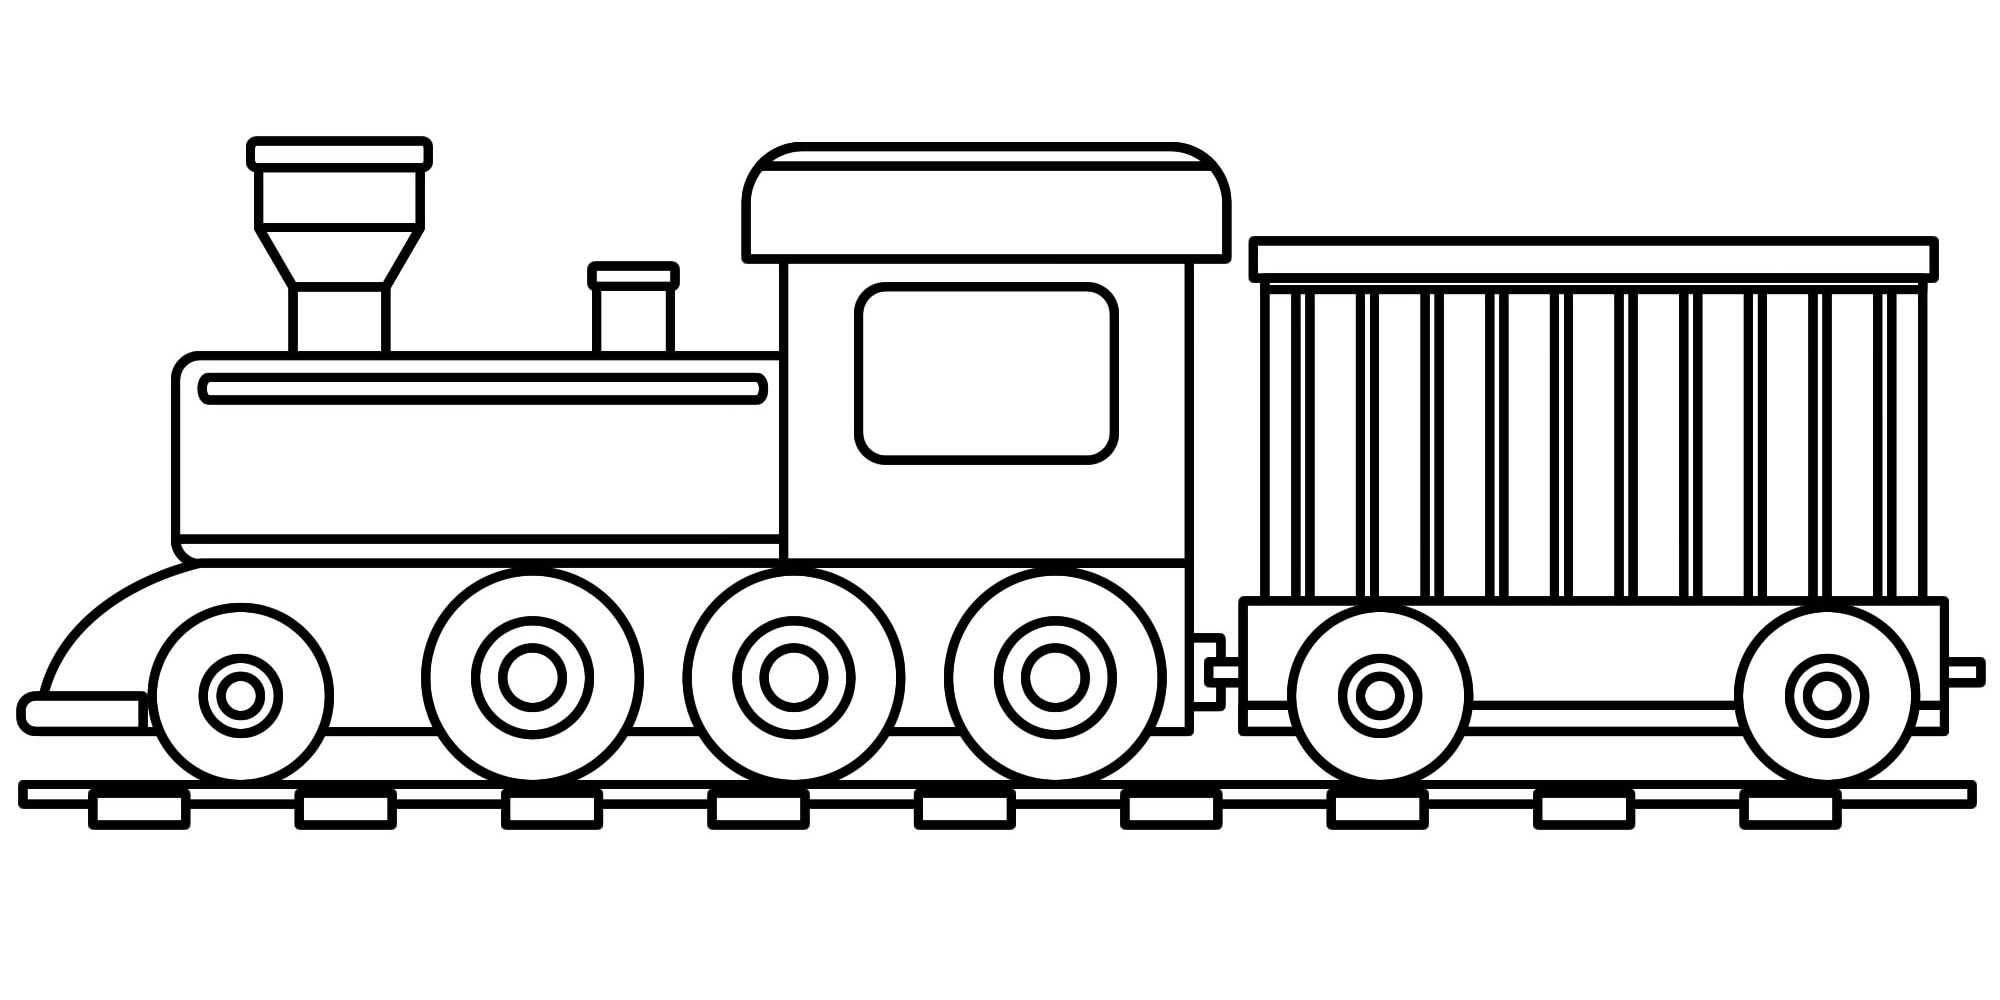 Playful train coloring page for 2-3 year olds